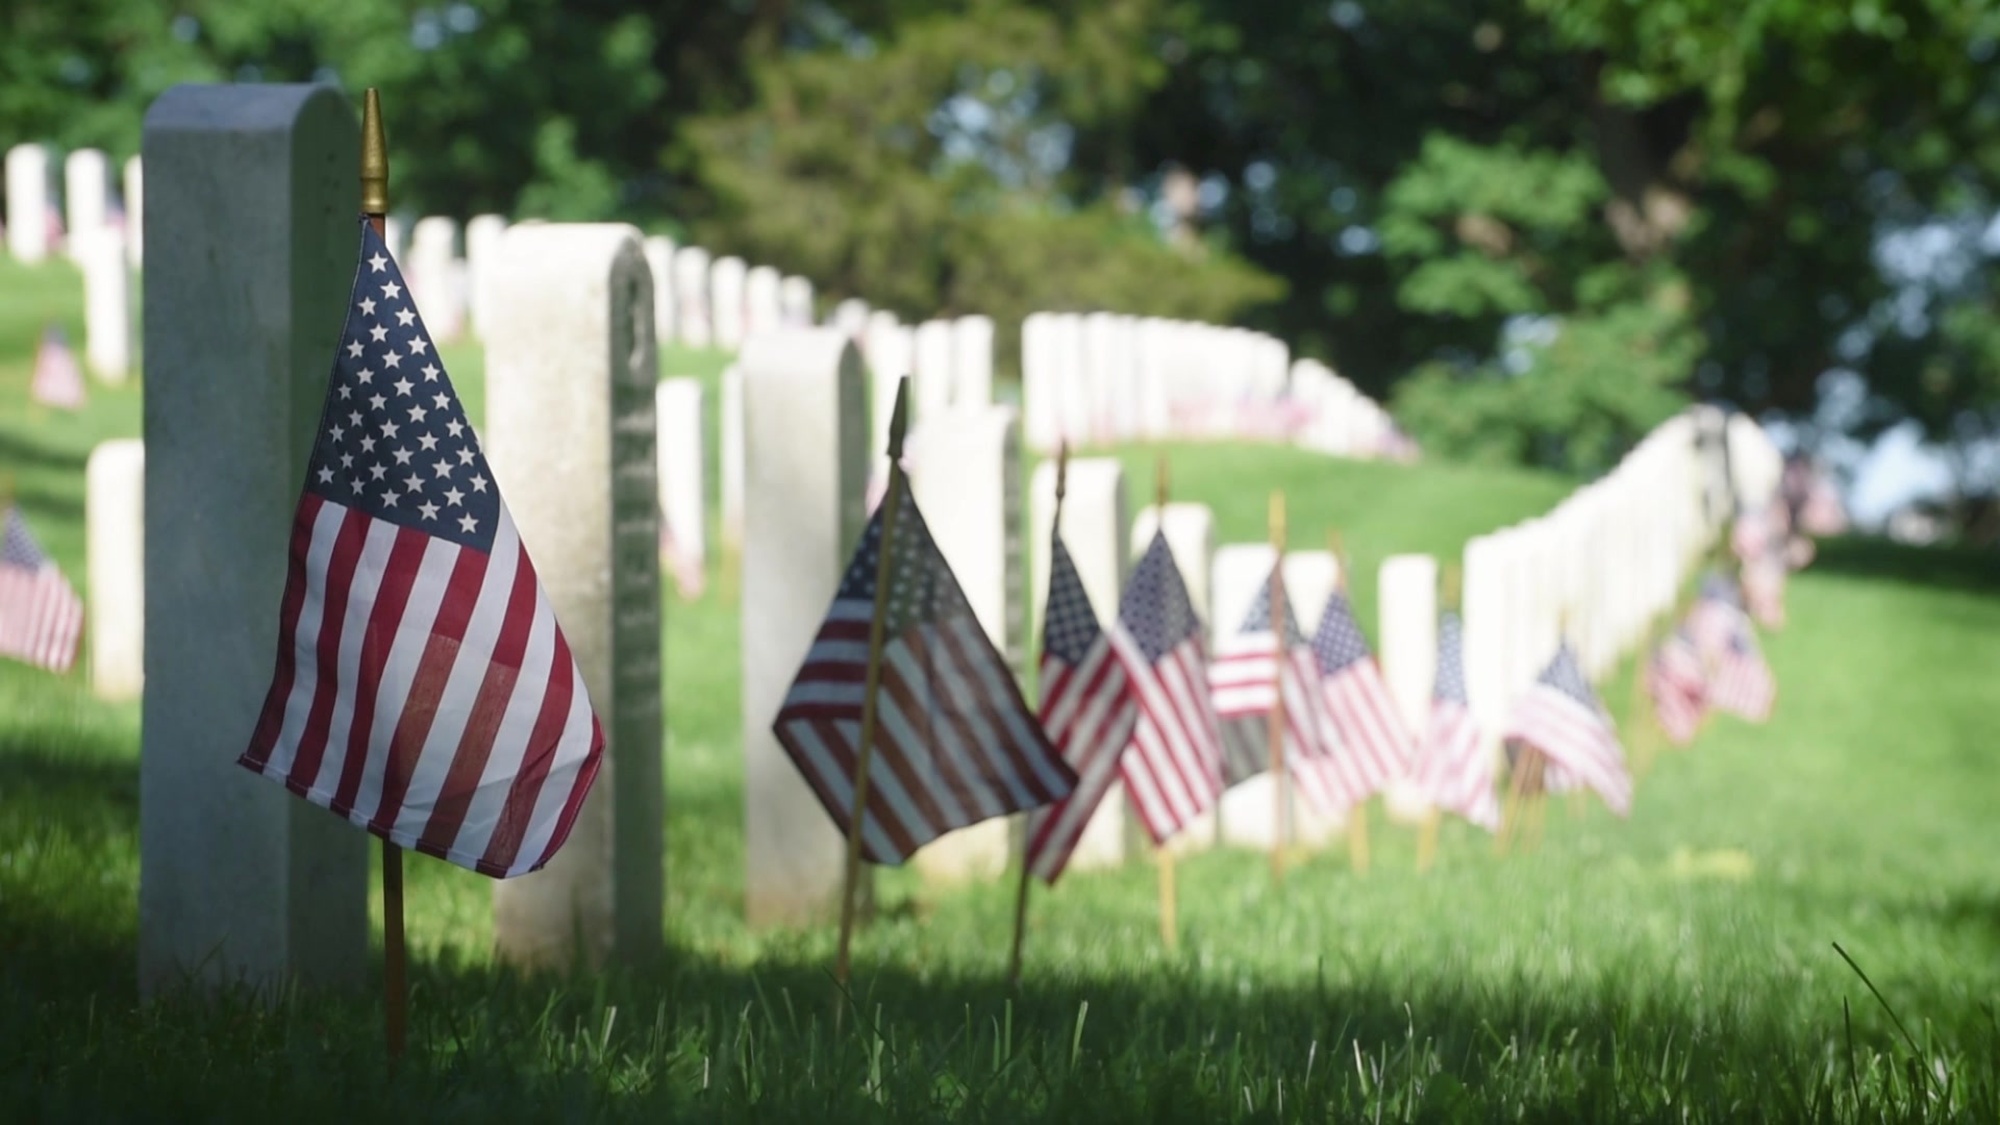 190524-N-YG104-0002 ARLINGTON, Va. (May 24, 2019) 250,000 American flags are placed at the foot of every headstone in the Arlington National Cemetery for Memorial Day Weekend. Arlington National Cemetery has evolved from a place of necessity to a national shrine to those who have honorably served our Nation during times of war – including every military conflict in American history – and during times of peace. The cemetery is the final resting place for service members, veterans and their families. “Service to country” is the common thread that binds all who are honored and remembered here. (U.S. Navy video by Mass Communication Specialist 1st Class Sarah Villegas)